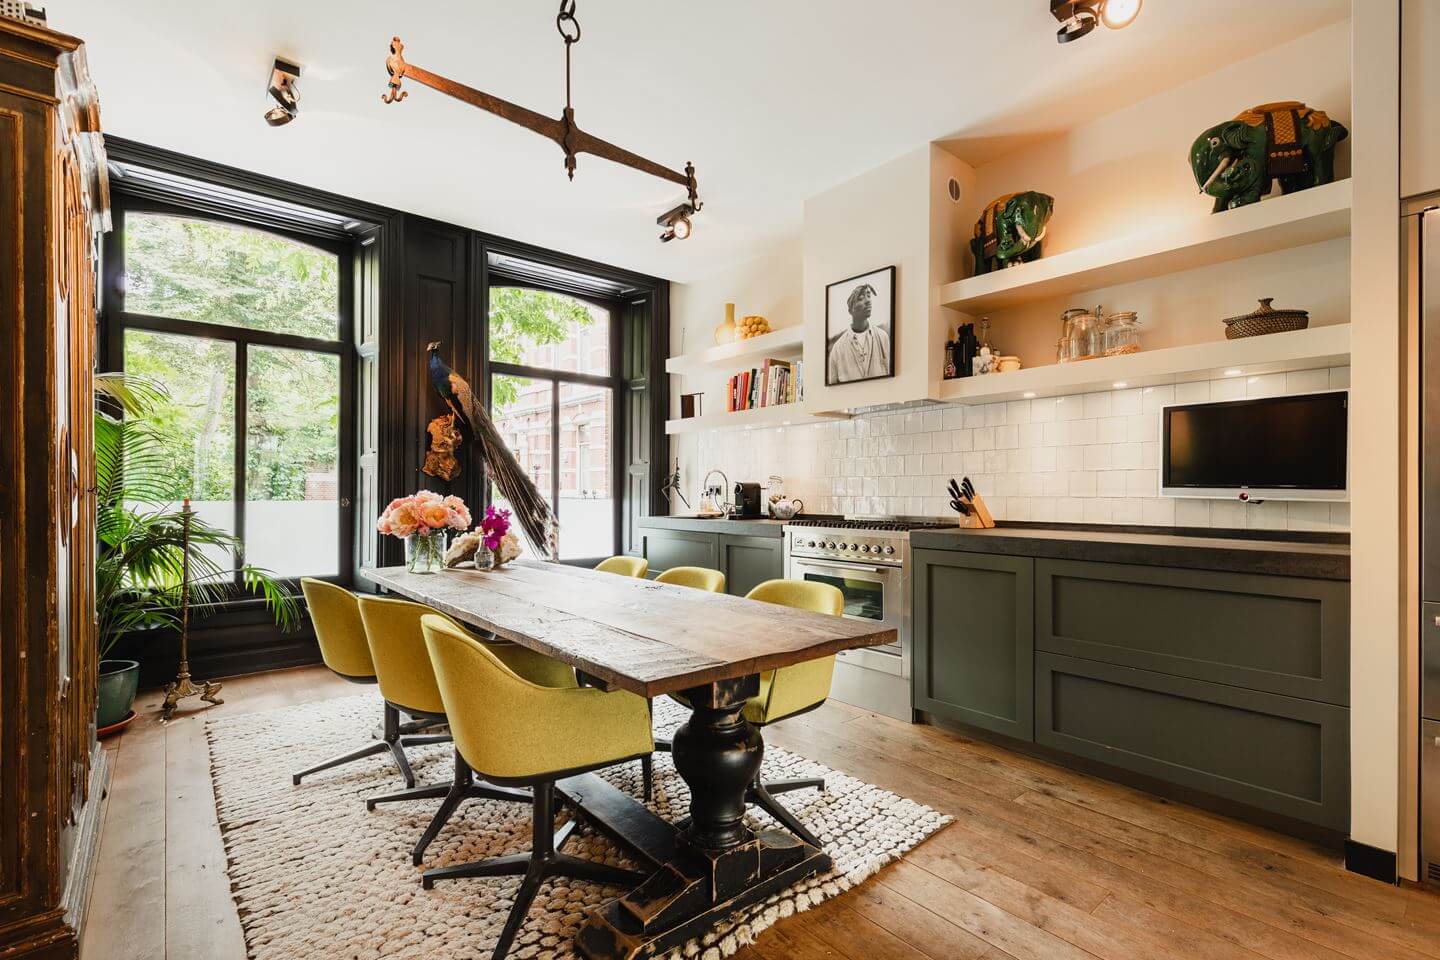 green-kitchen-open-shelves-dining-table-yellow-dining-chairs-townhouse-amsterdam-nordroom